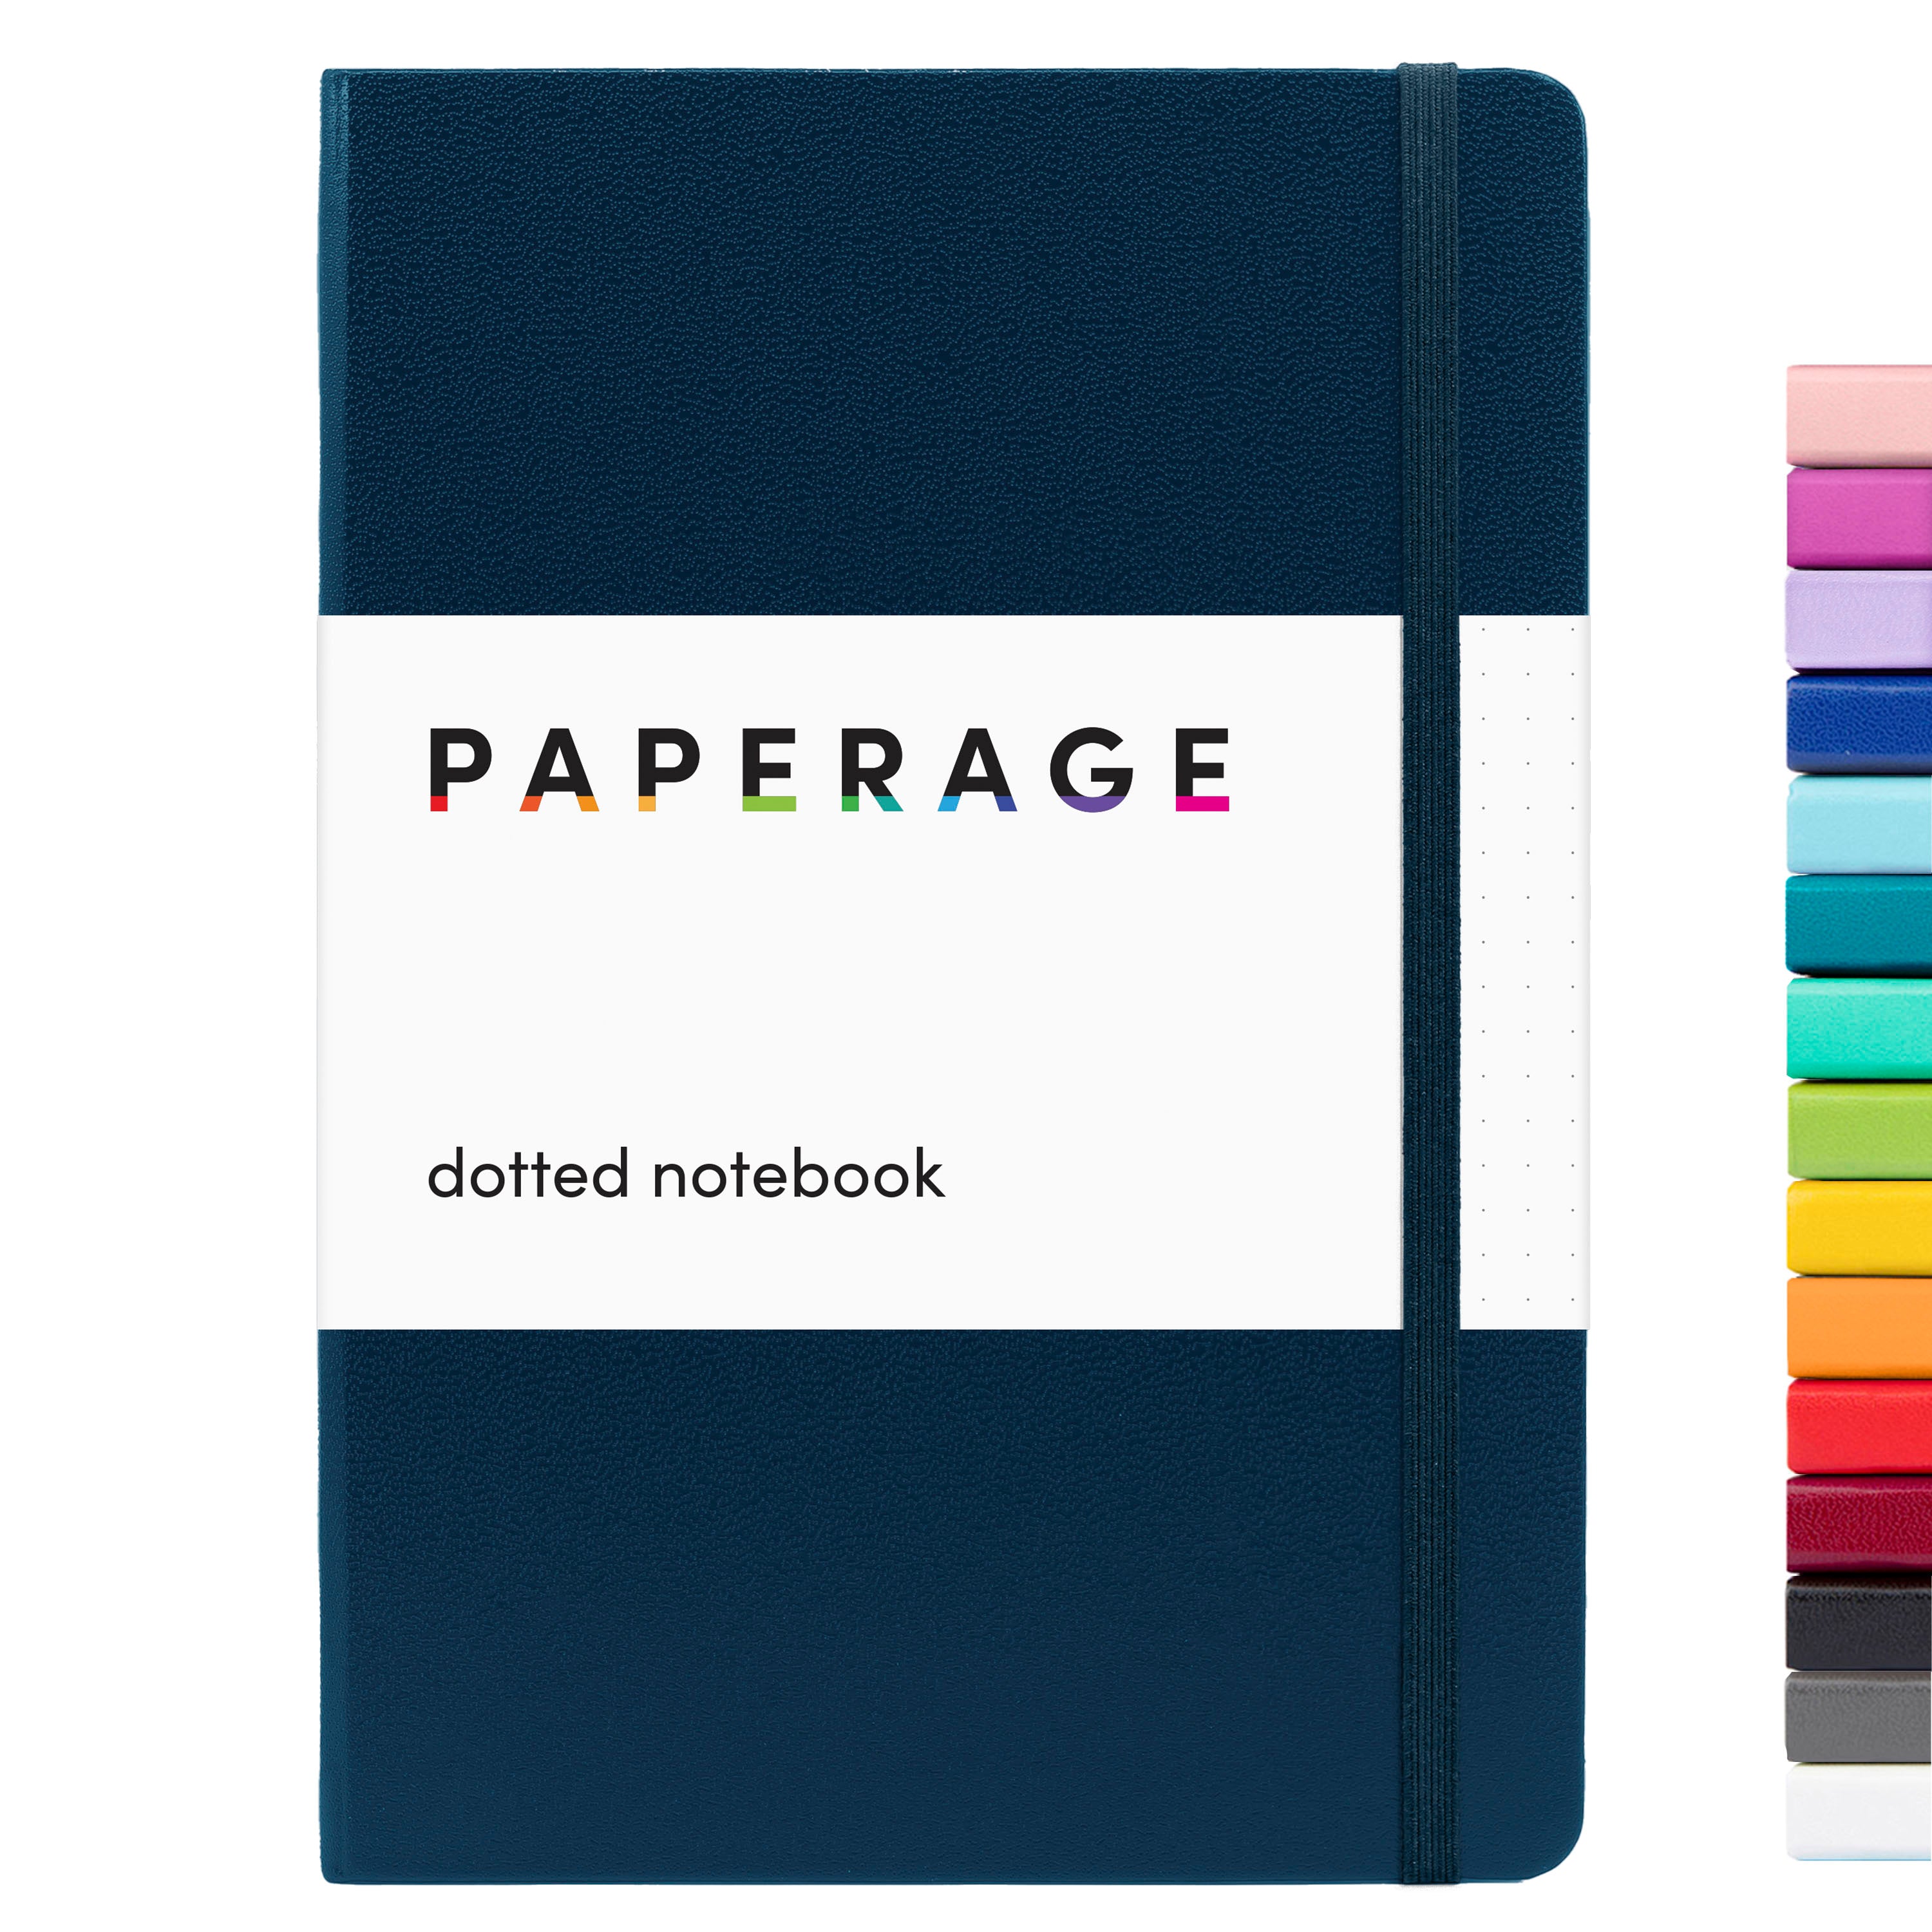 PAPERAGE Dotted Journal Notebook, (Mint), 160 Pages, Hardcover, 5.7” x 8”